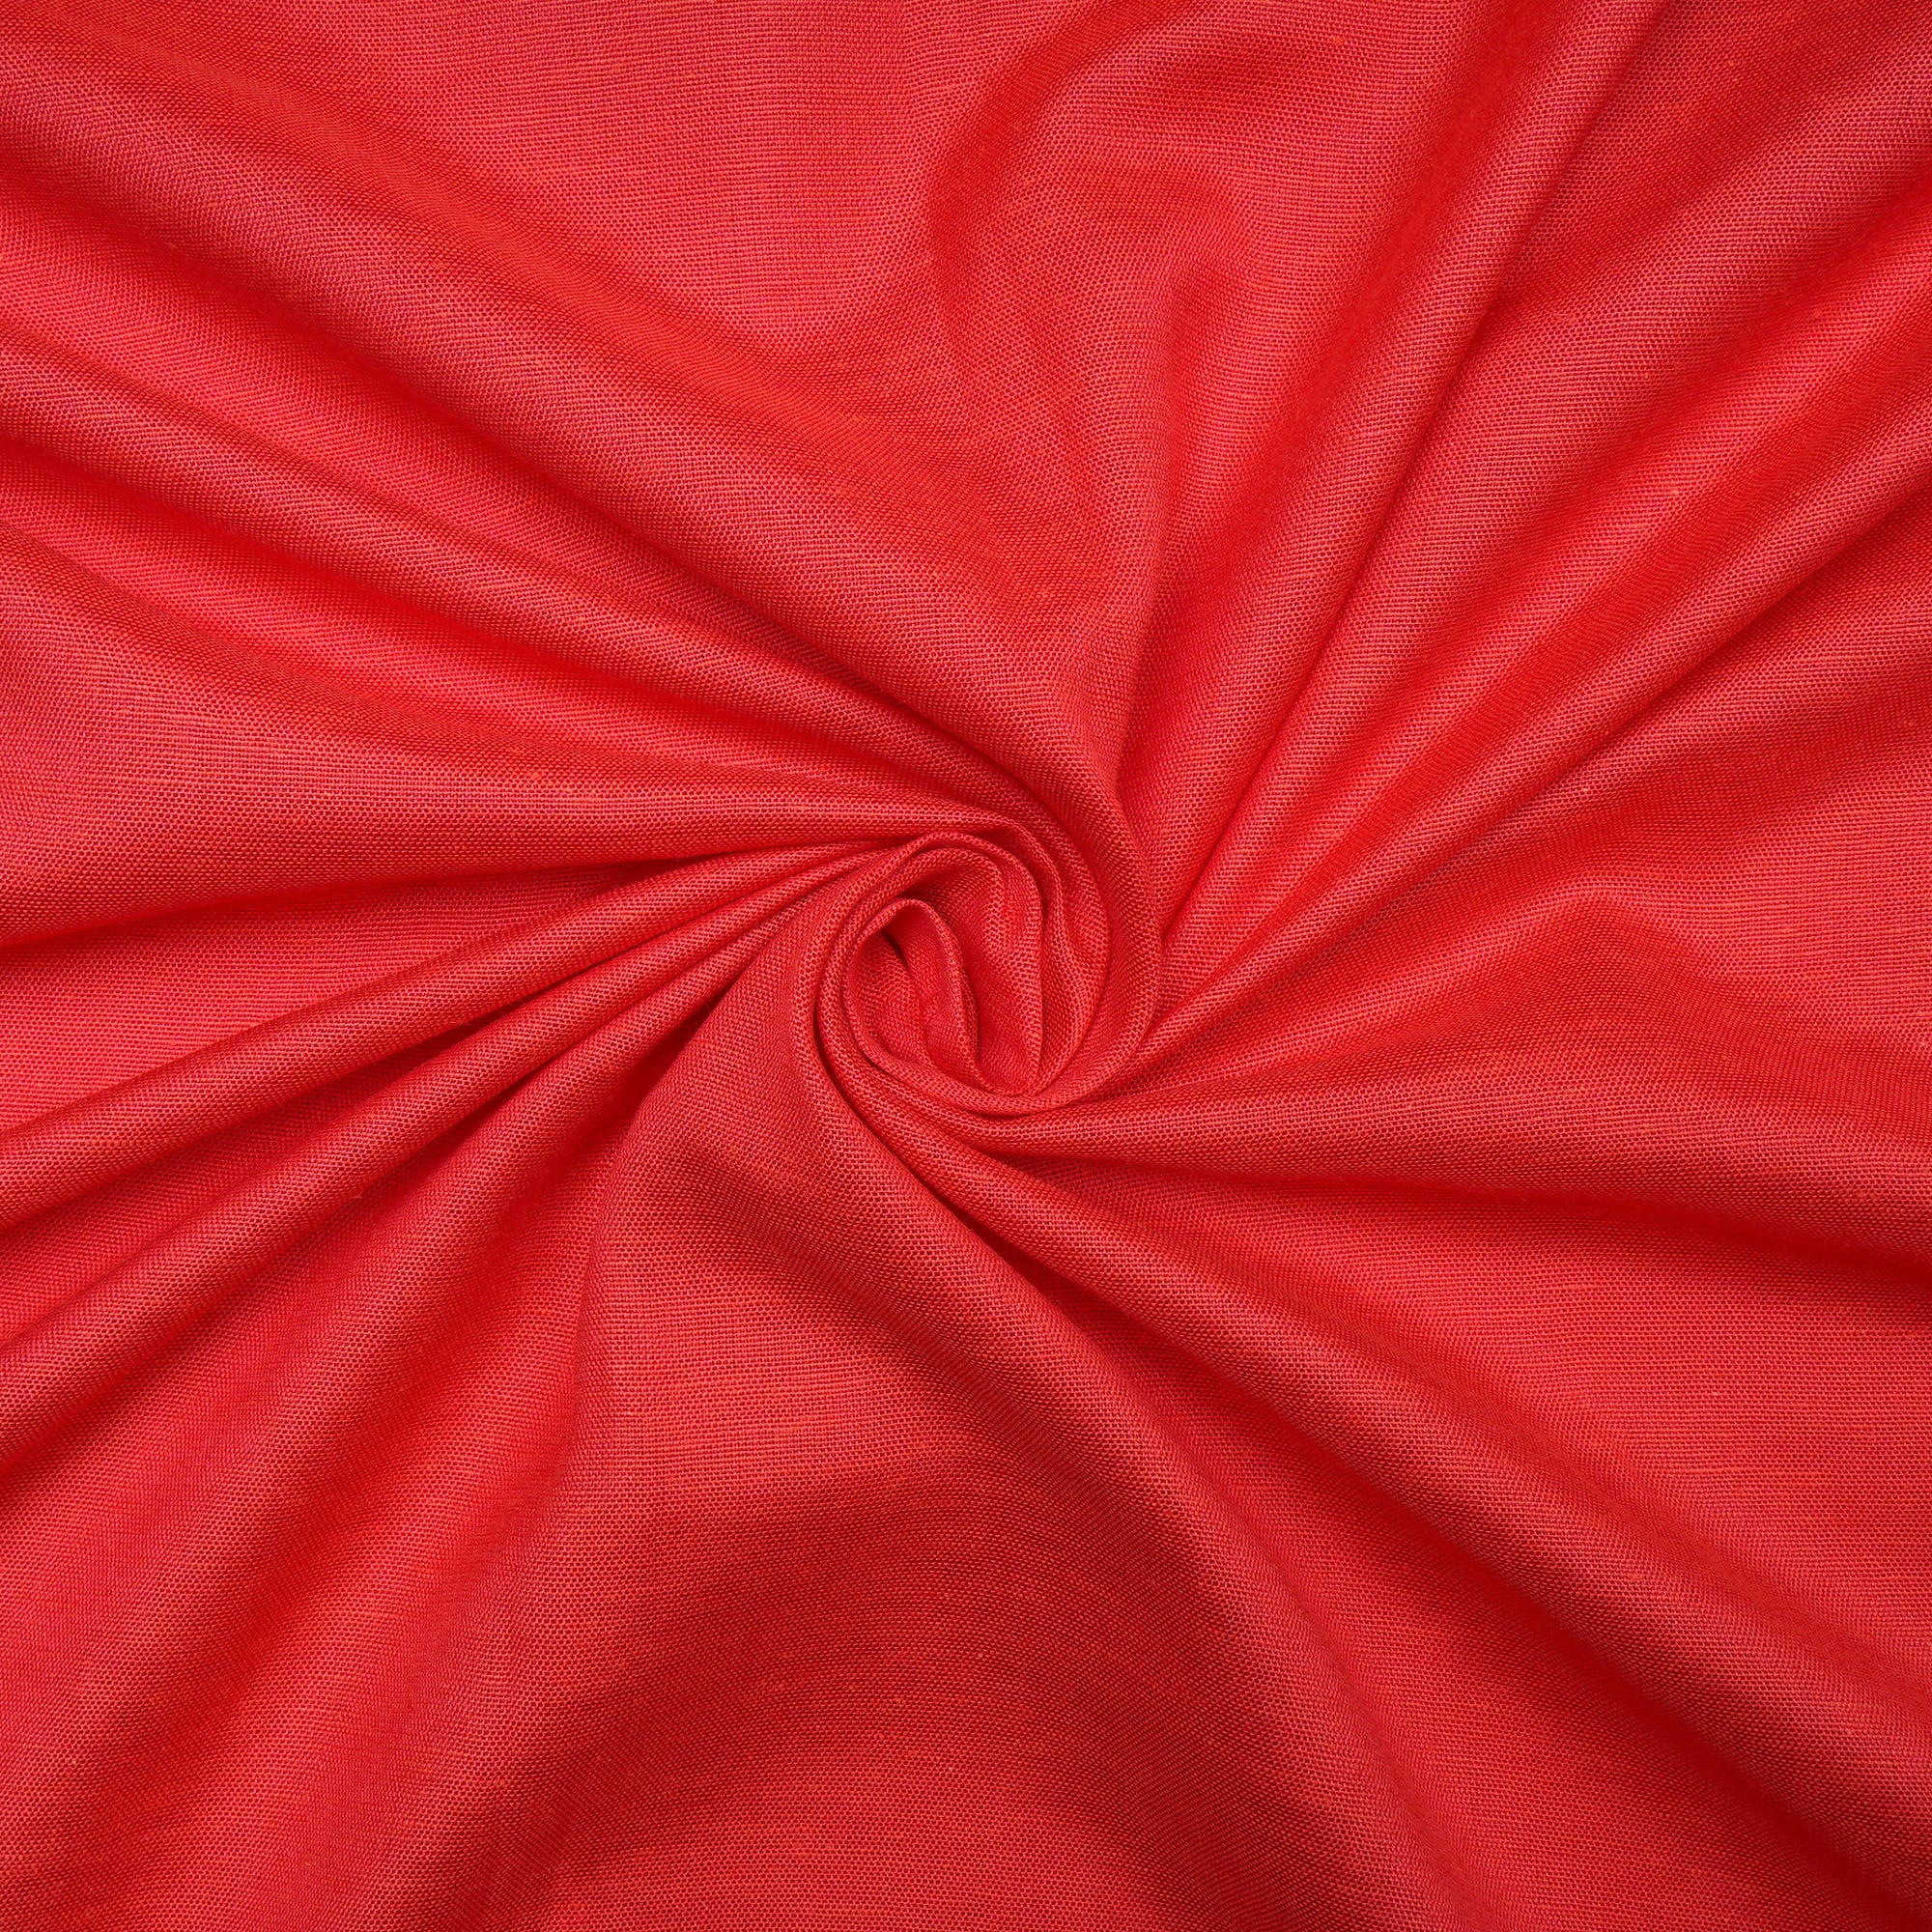 Bittersweet Red Rayon South Cotton Fabric